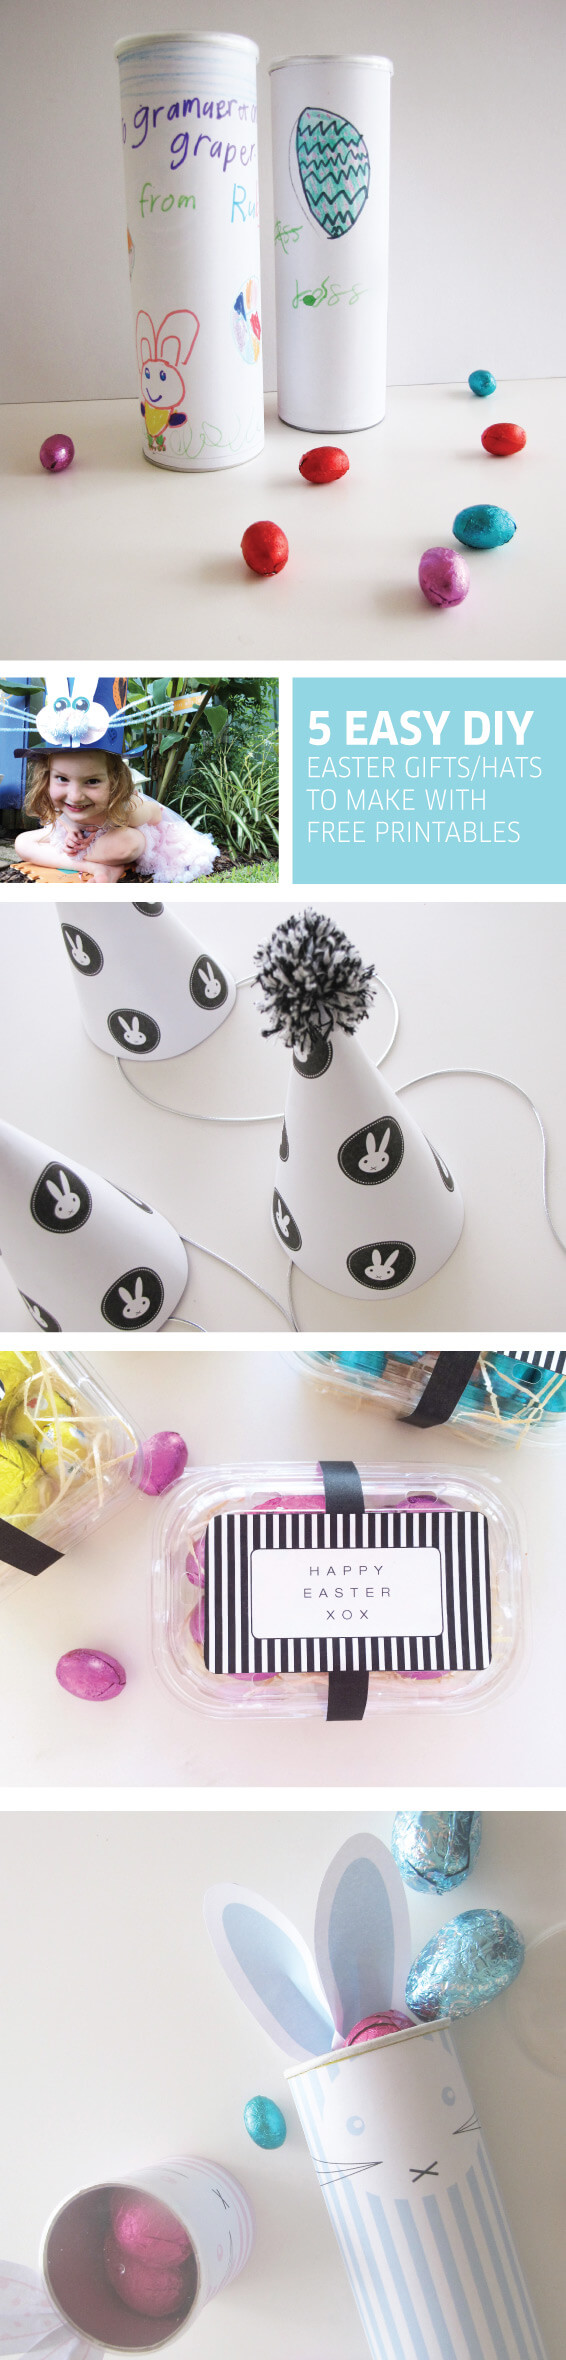 5-Easy-DIY-Easter-GiftsHats-to-make